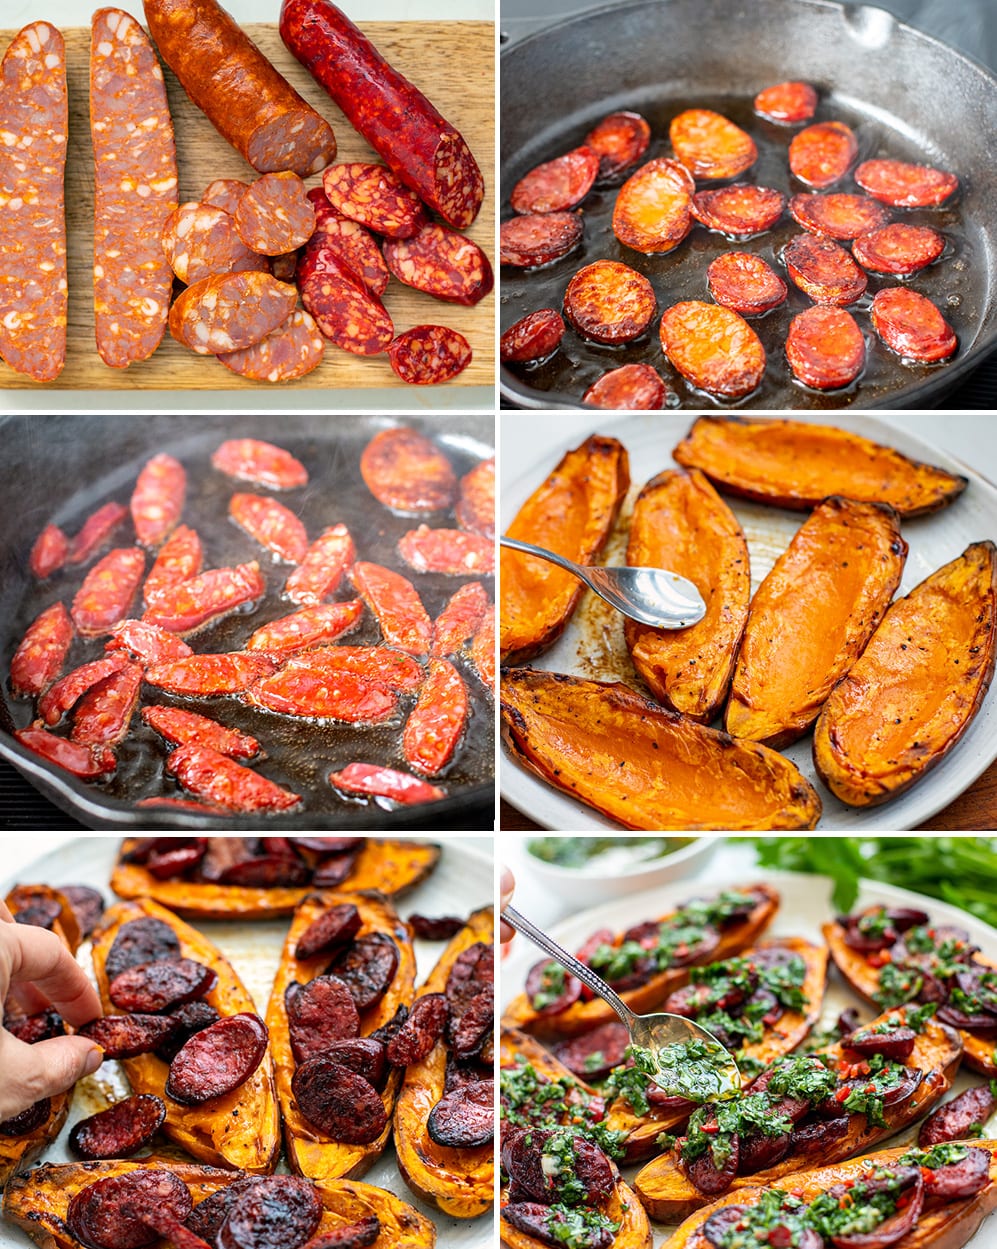 pan-frying chorizo and making sweet potato boats filled with sausage and chimichurri sauce